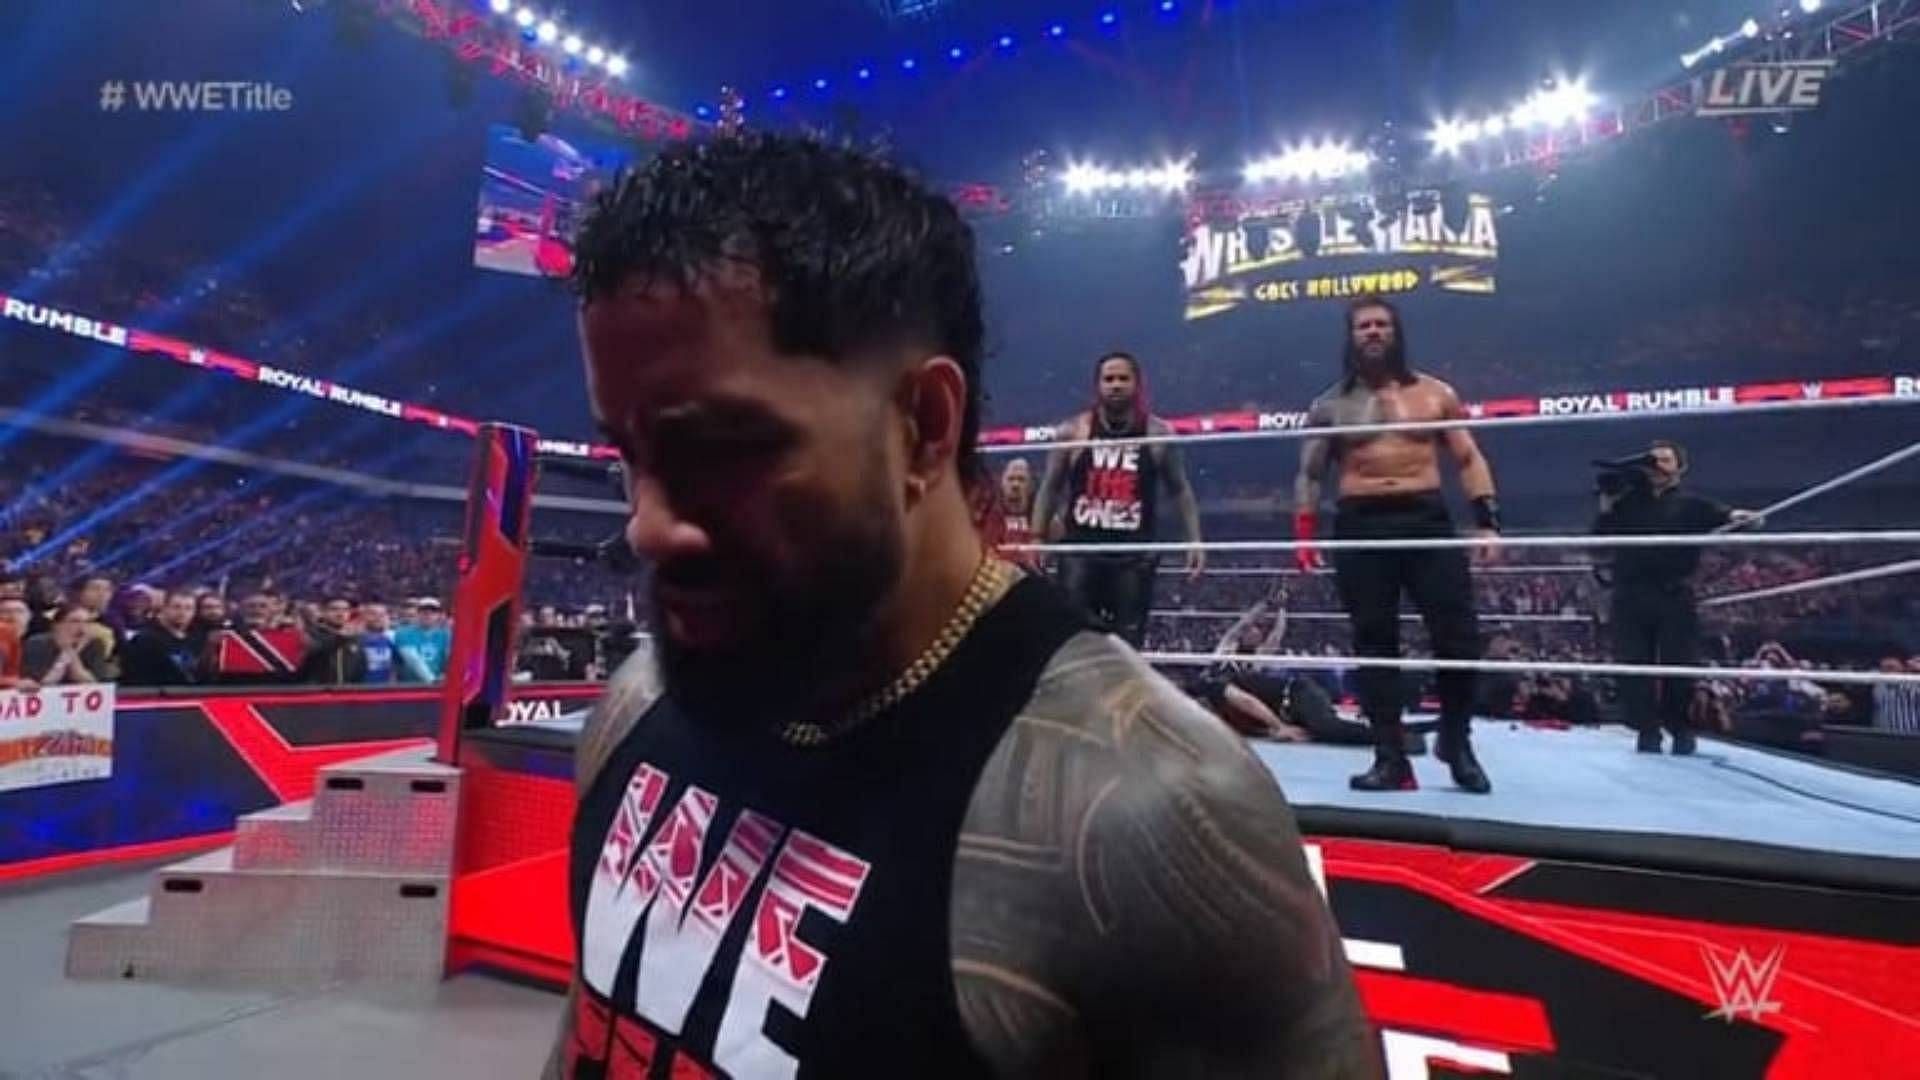 Jey Uso leaves The Bloodline on SmackDown, leaving fans shocked and uncertain about his future. 14